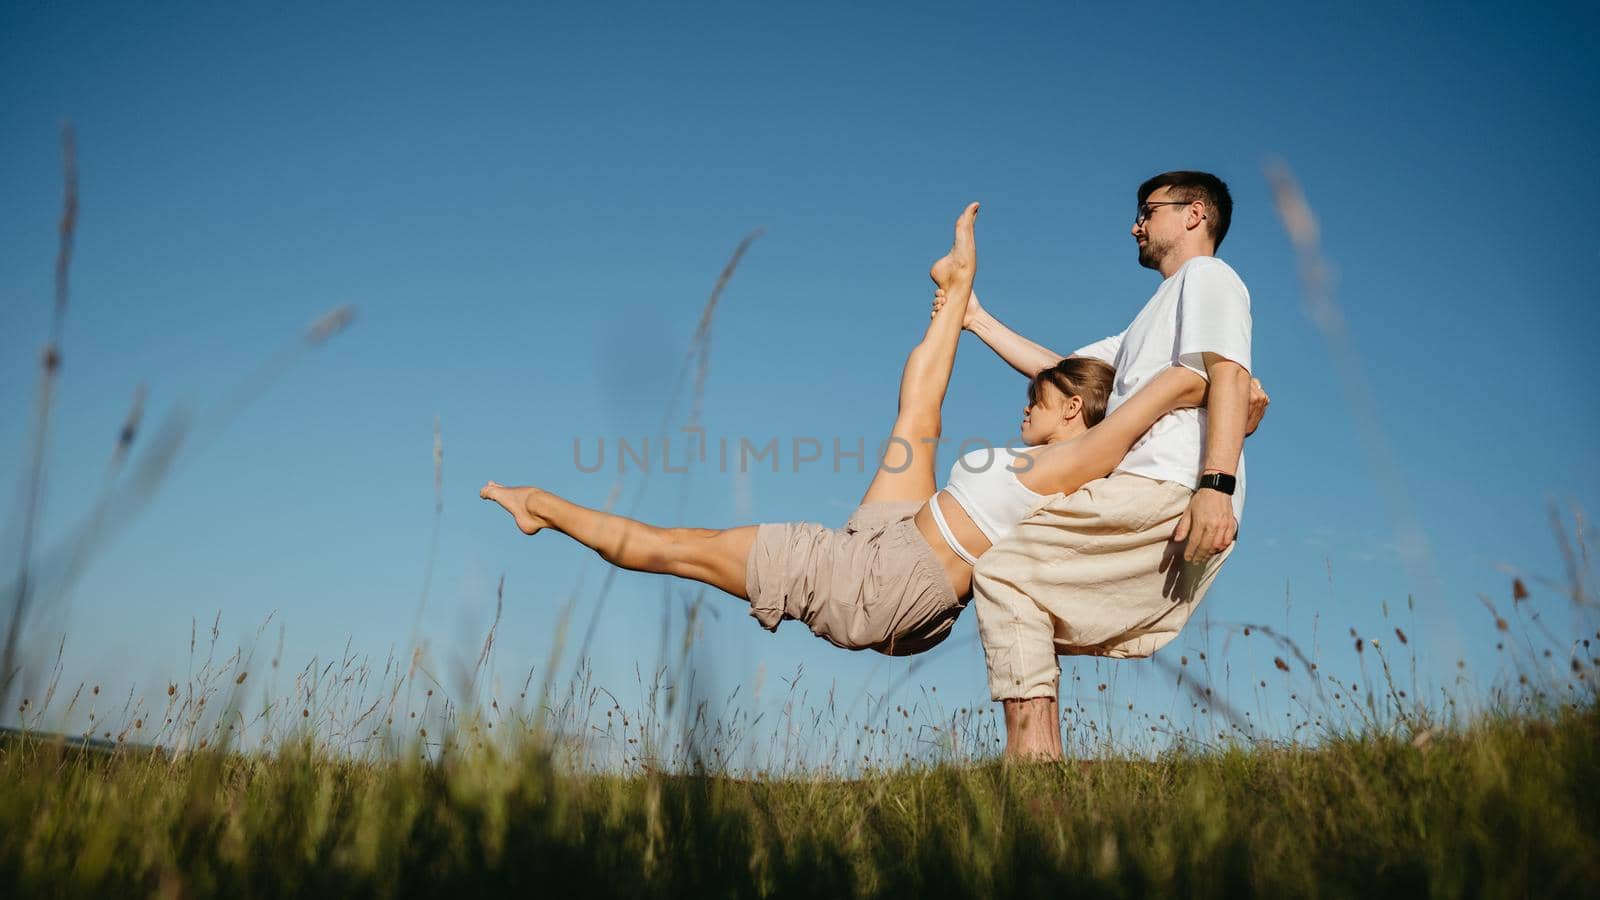 Man and Woman Dressed Alike Doing Difficult Pose While Practicing Yoga Outdoors in the Field with Blue Sky on the Background by Romvy